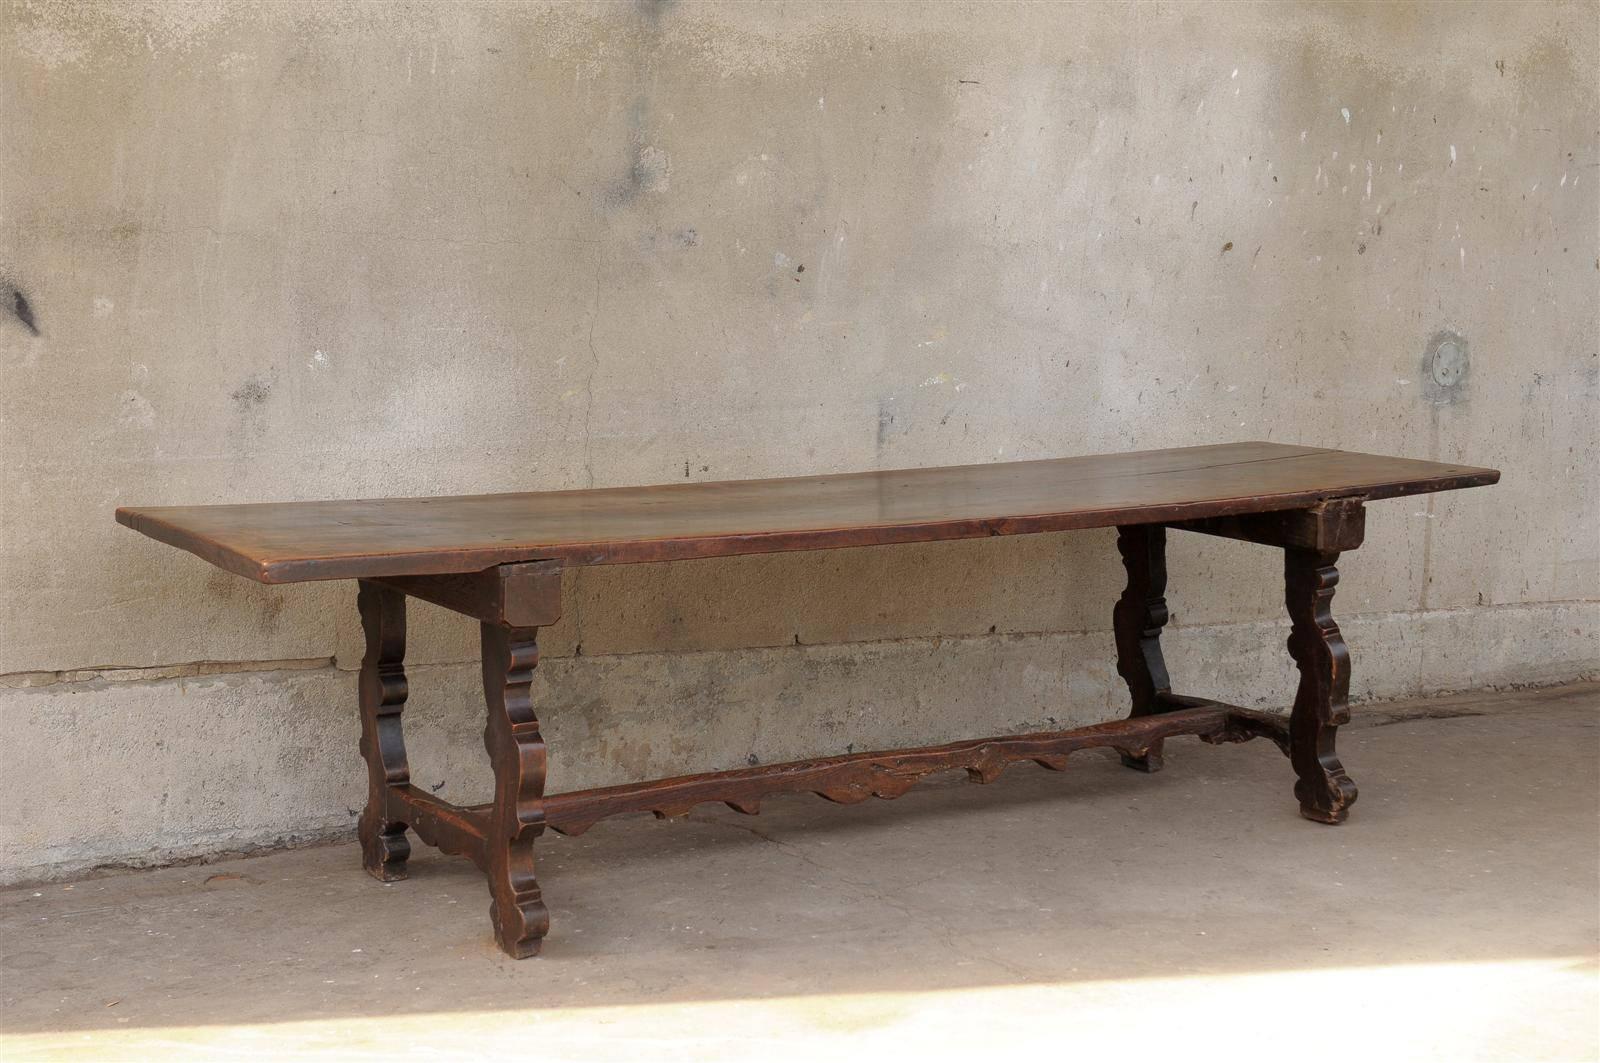 An Italian 18th century walnut dining trestle farm table with interesting cross stretcher and single board on the top.